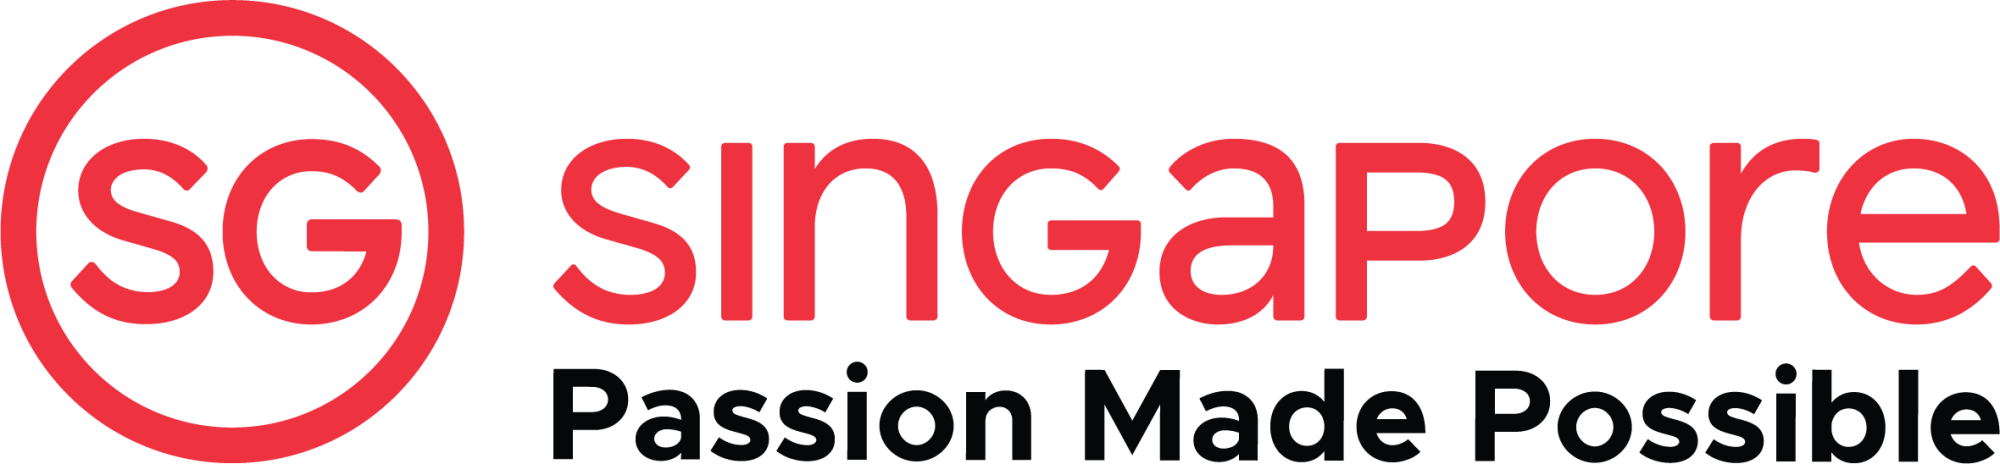 SG - Passion Made Possible Logo.png